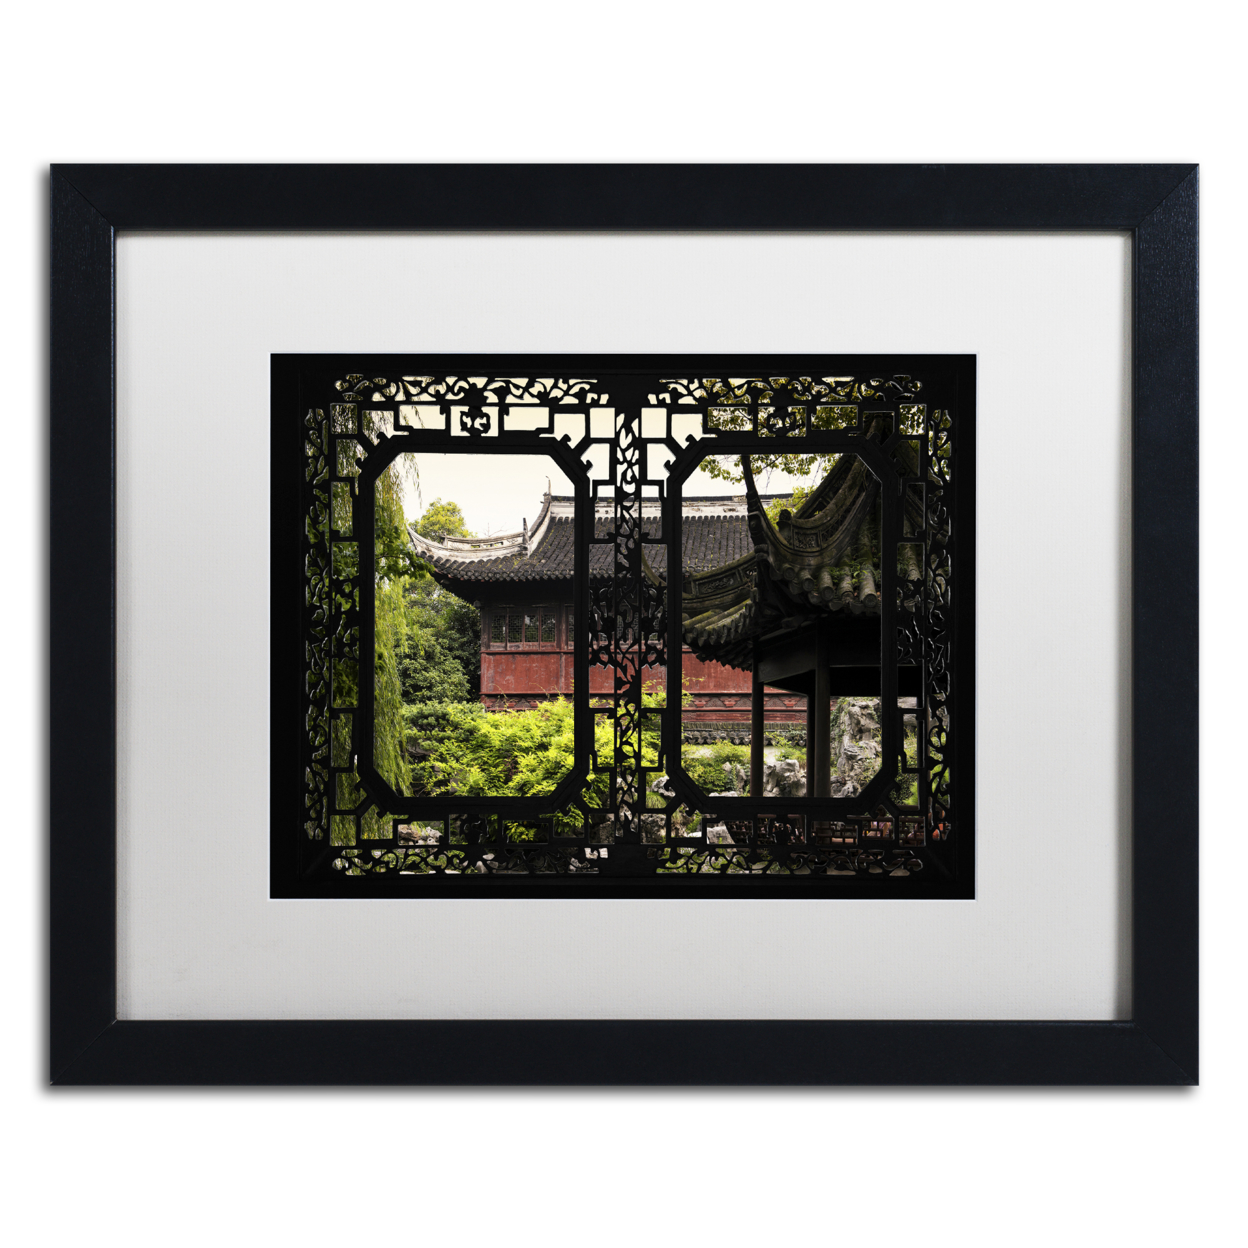 Philippe Hugonnard 'Red Pavilion' Black Wooden Framed Art 18 X 22 Inches